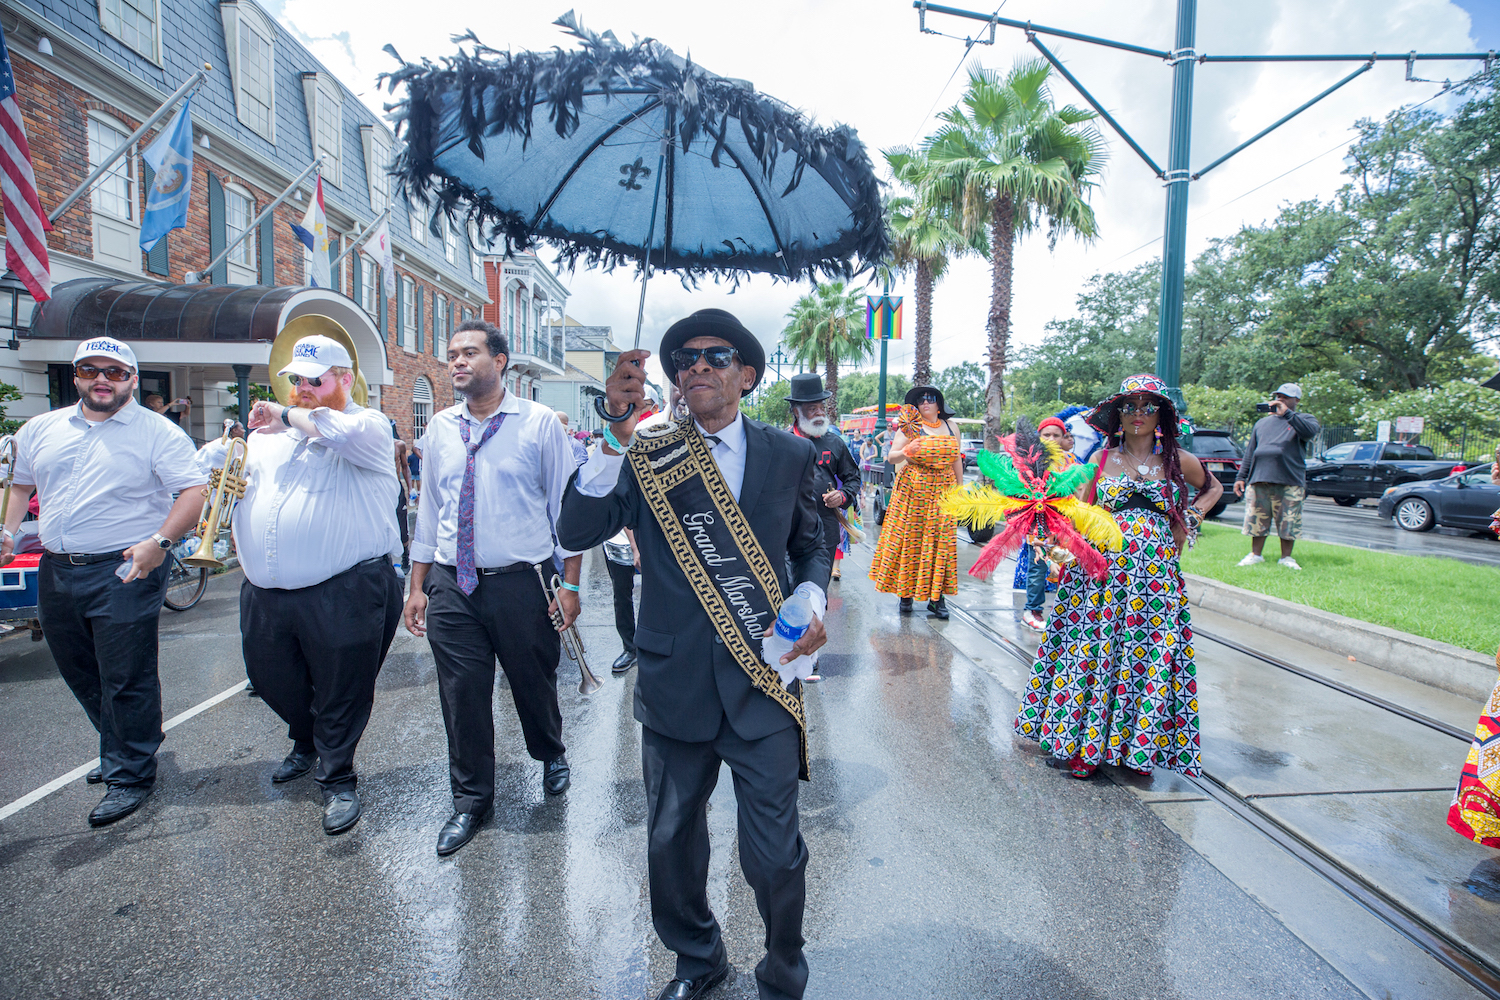 What's Happening in New Orleans in August? French Market Inn